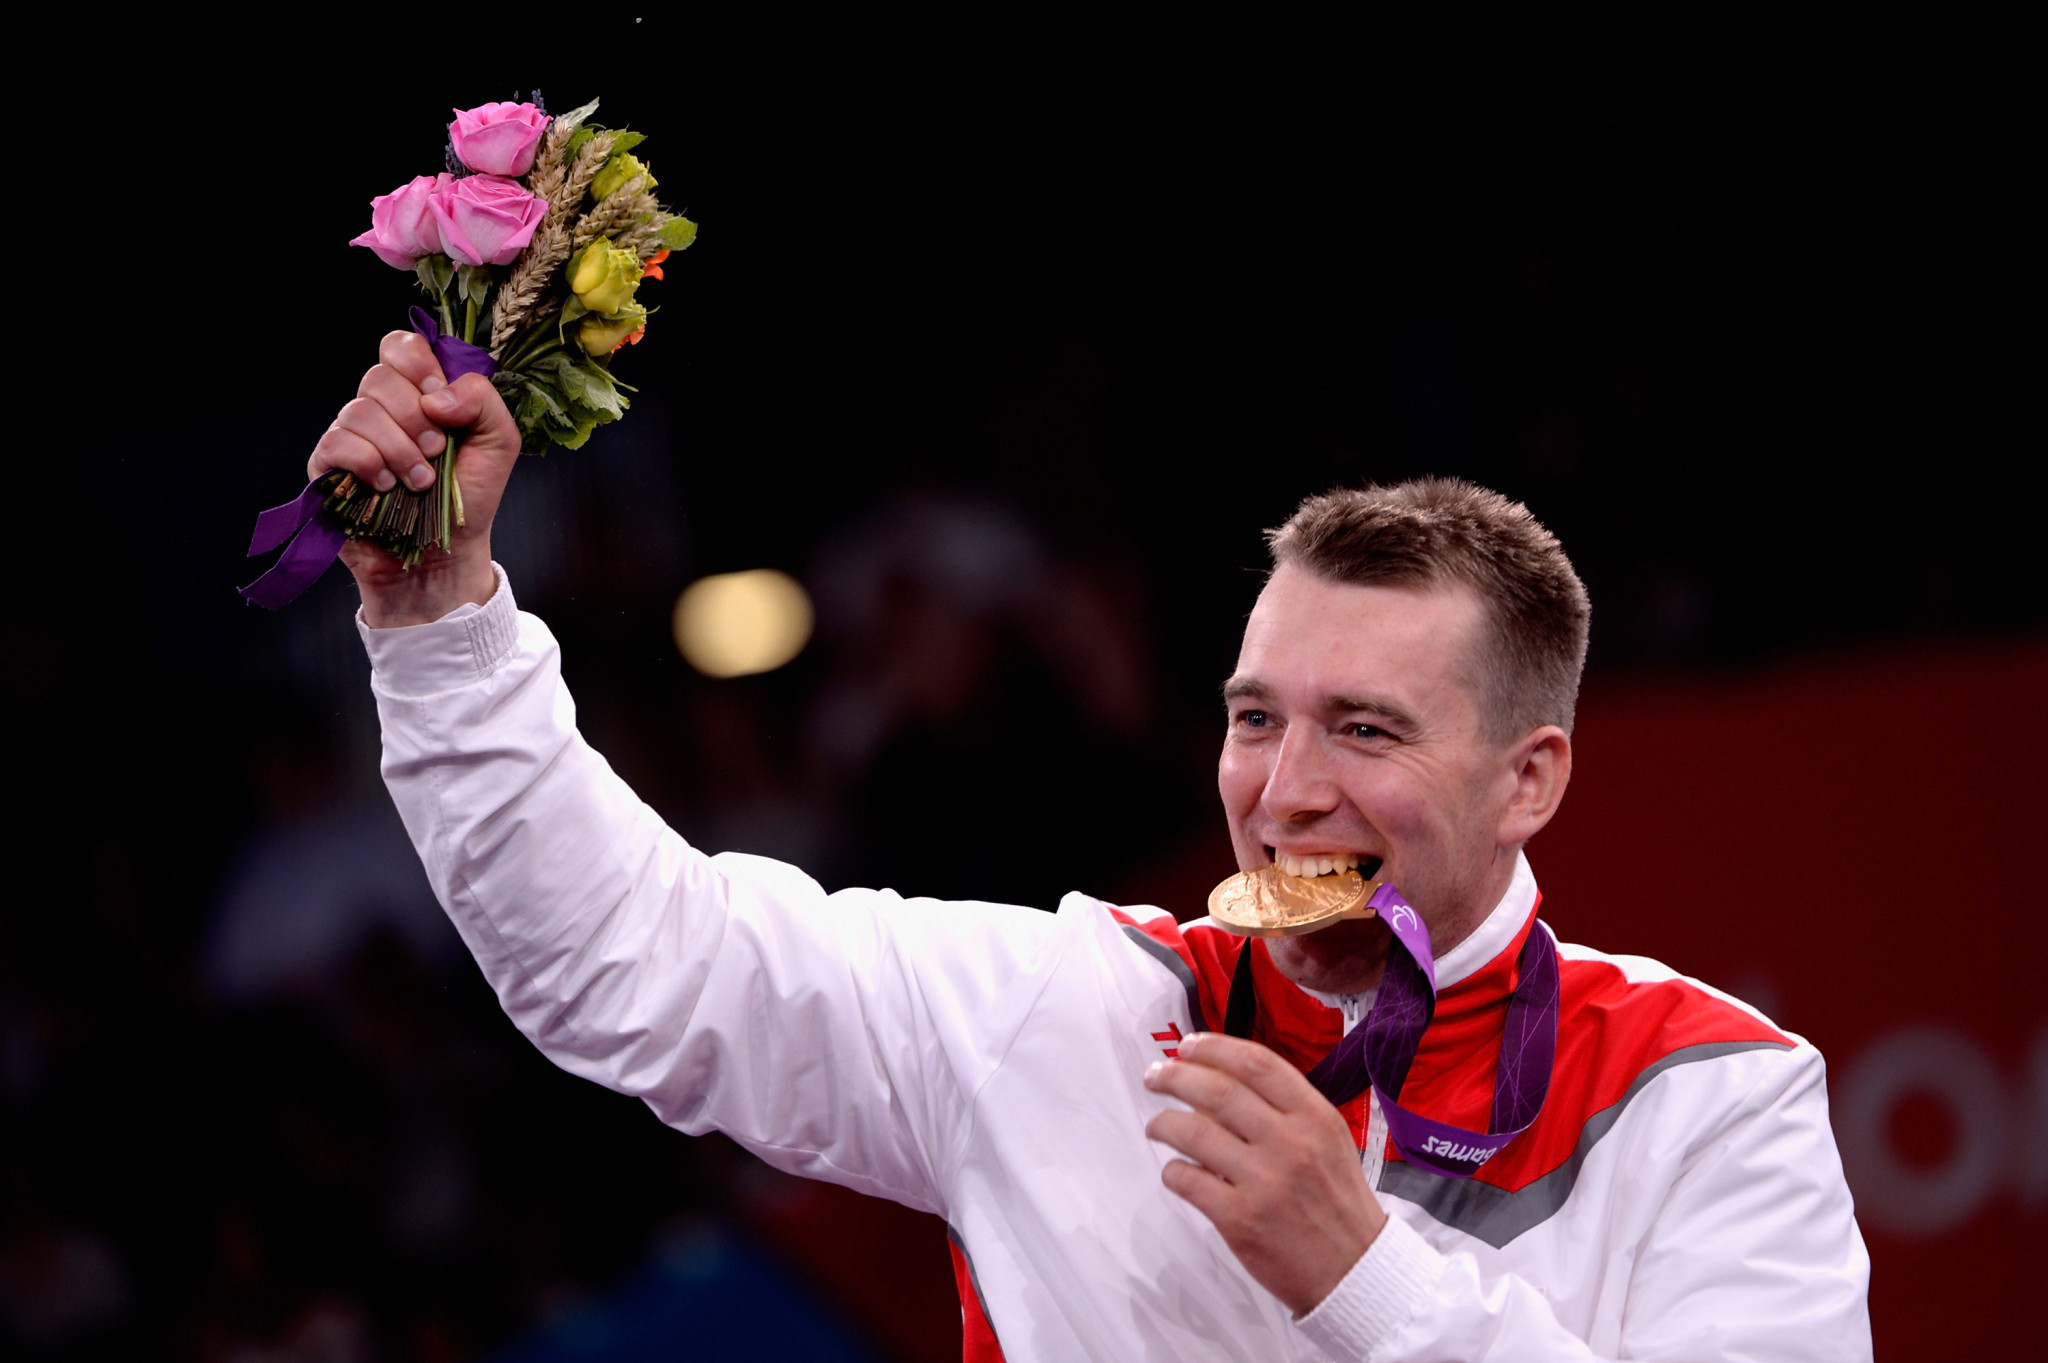 London 2012 Paralympic champion Grzegorz Pluta of Poland won the men's sabre category B at the IWAS Wheelchair Fencing World Cup in Pisa ©Getty Images